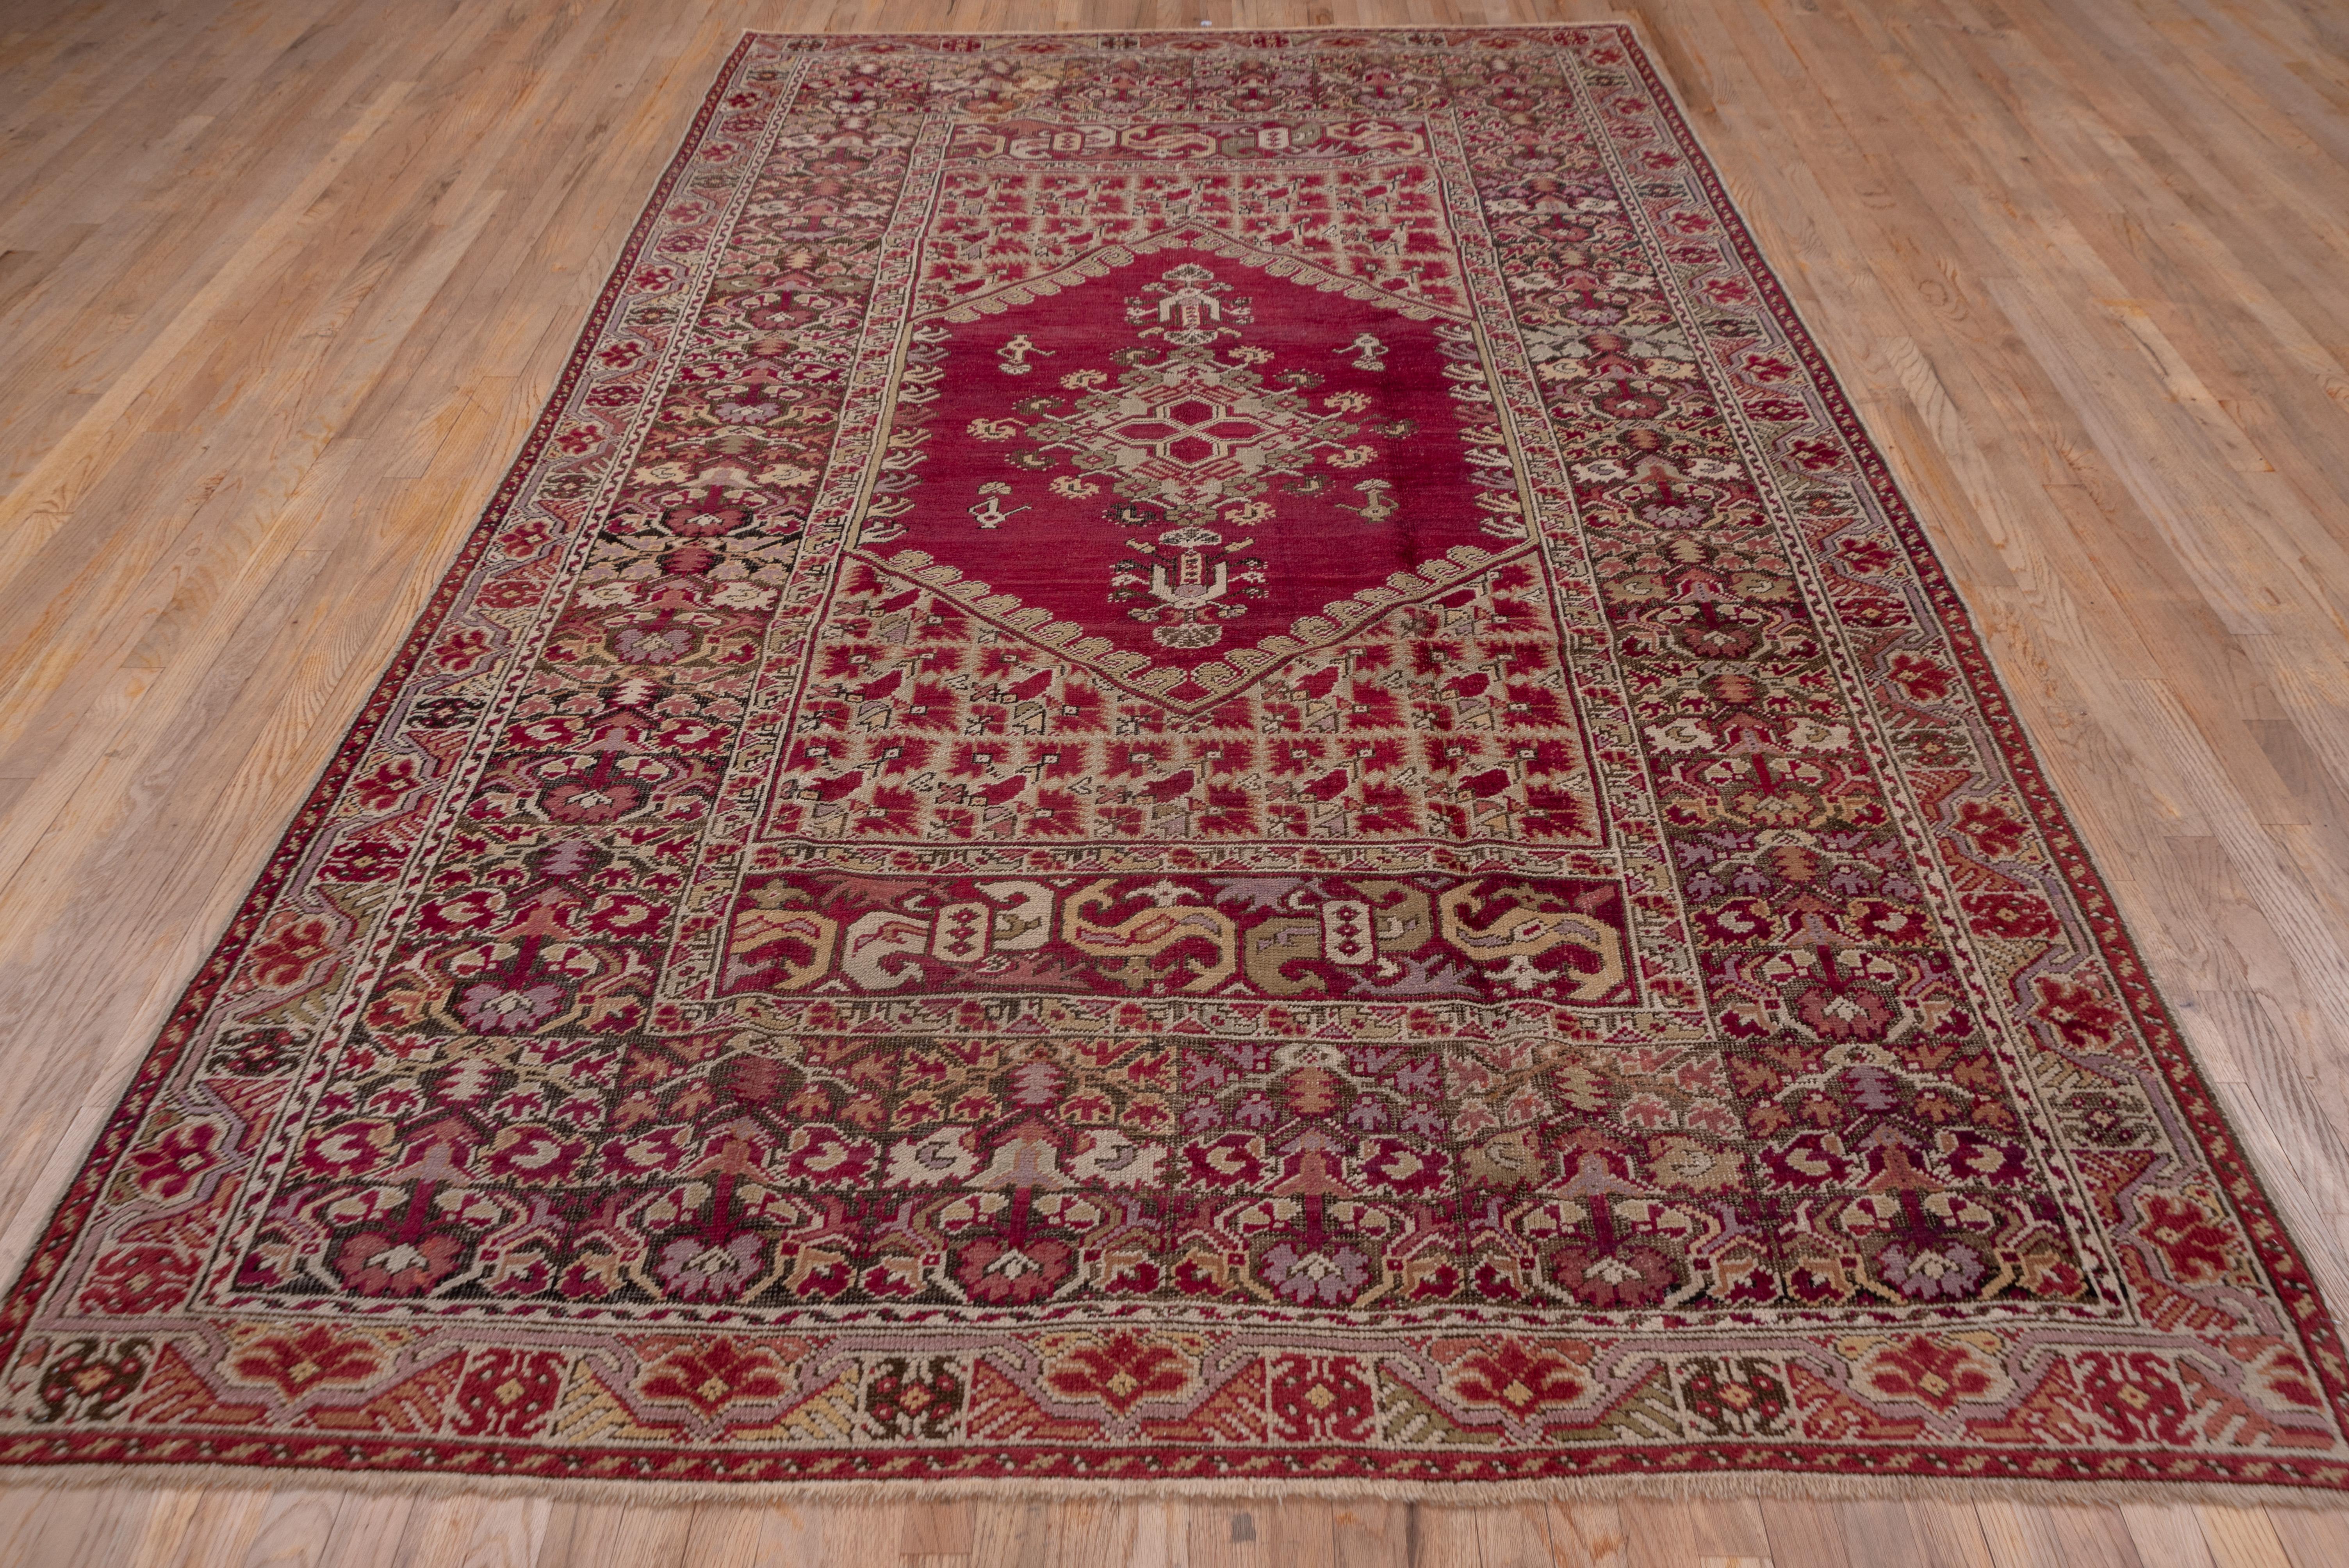 Hand-Knotted Finely Woven Antique Turkish Ghiordes Rug, Ruby Red Field, circa 1900s For Sale